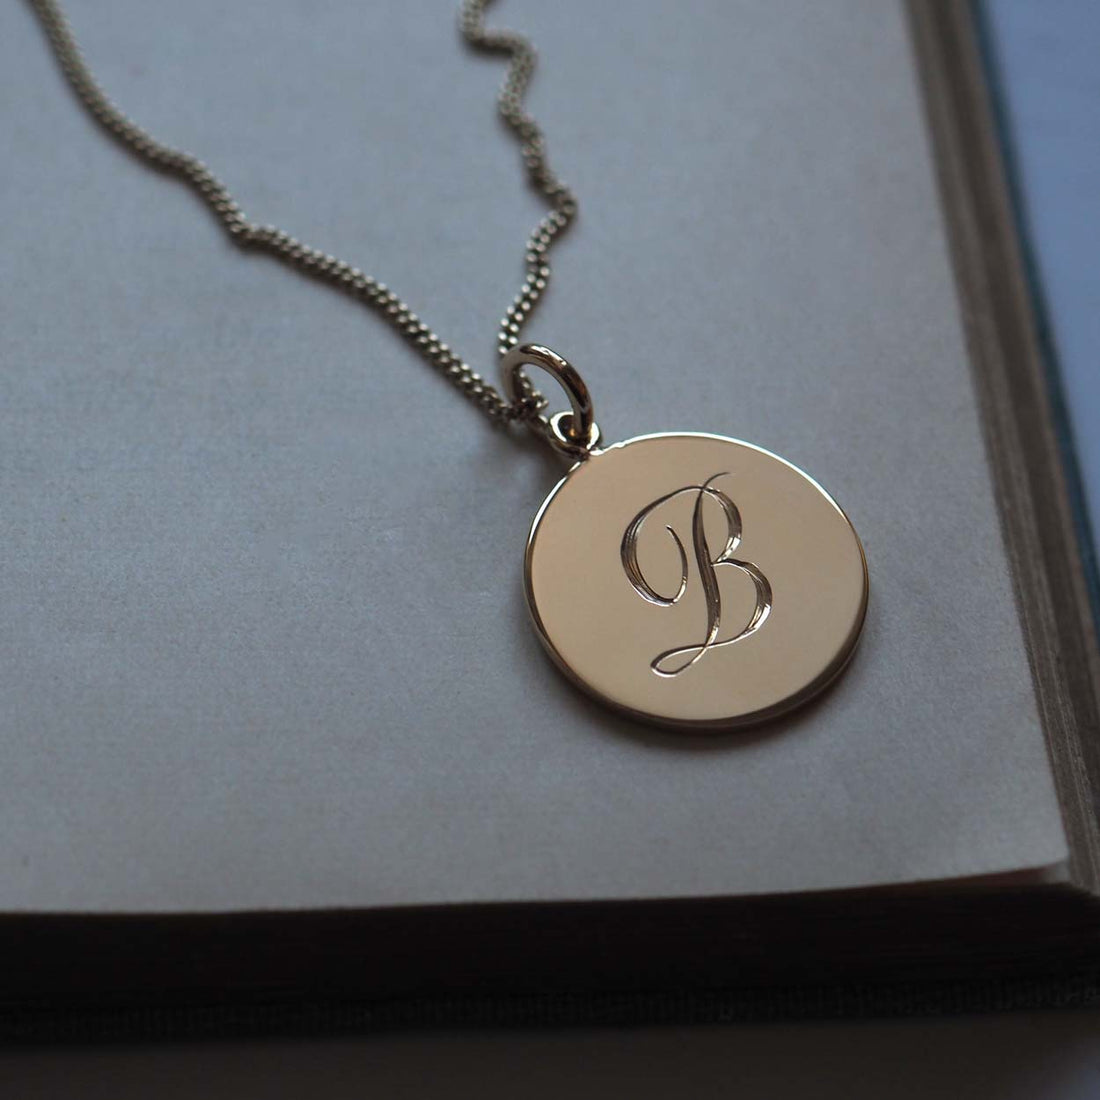 Bianca Jones handcrafted and hand-engraved solid 9ct gold initial charm, available in rose, white, or yellow gold, showcasing bespoke craftsmanship.